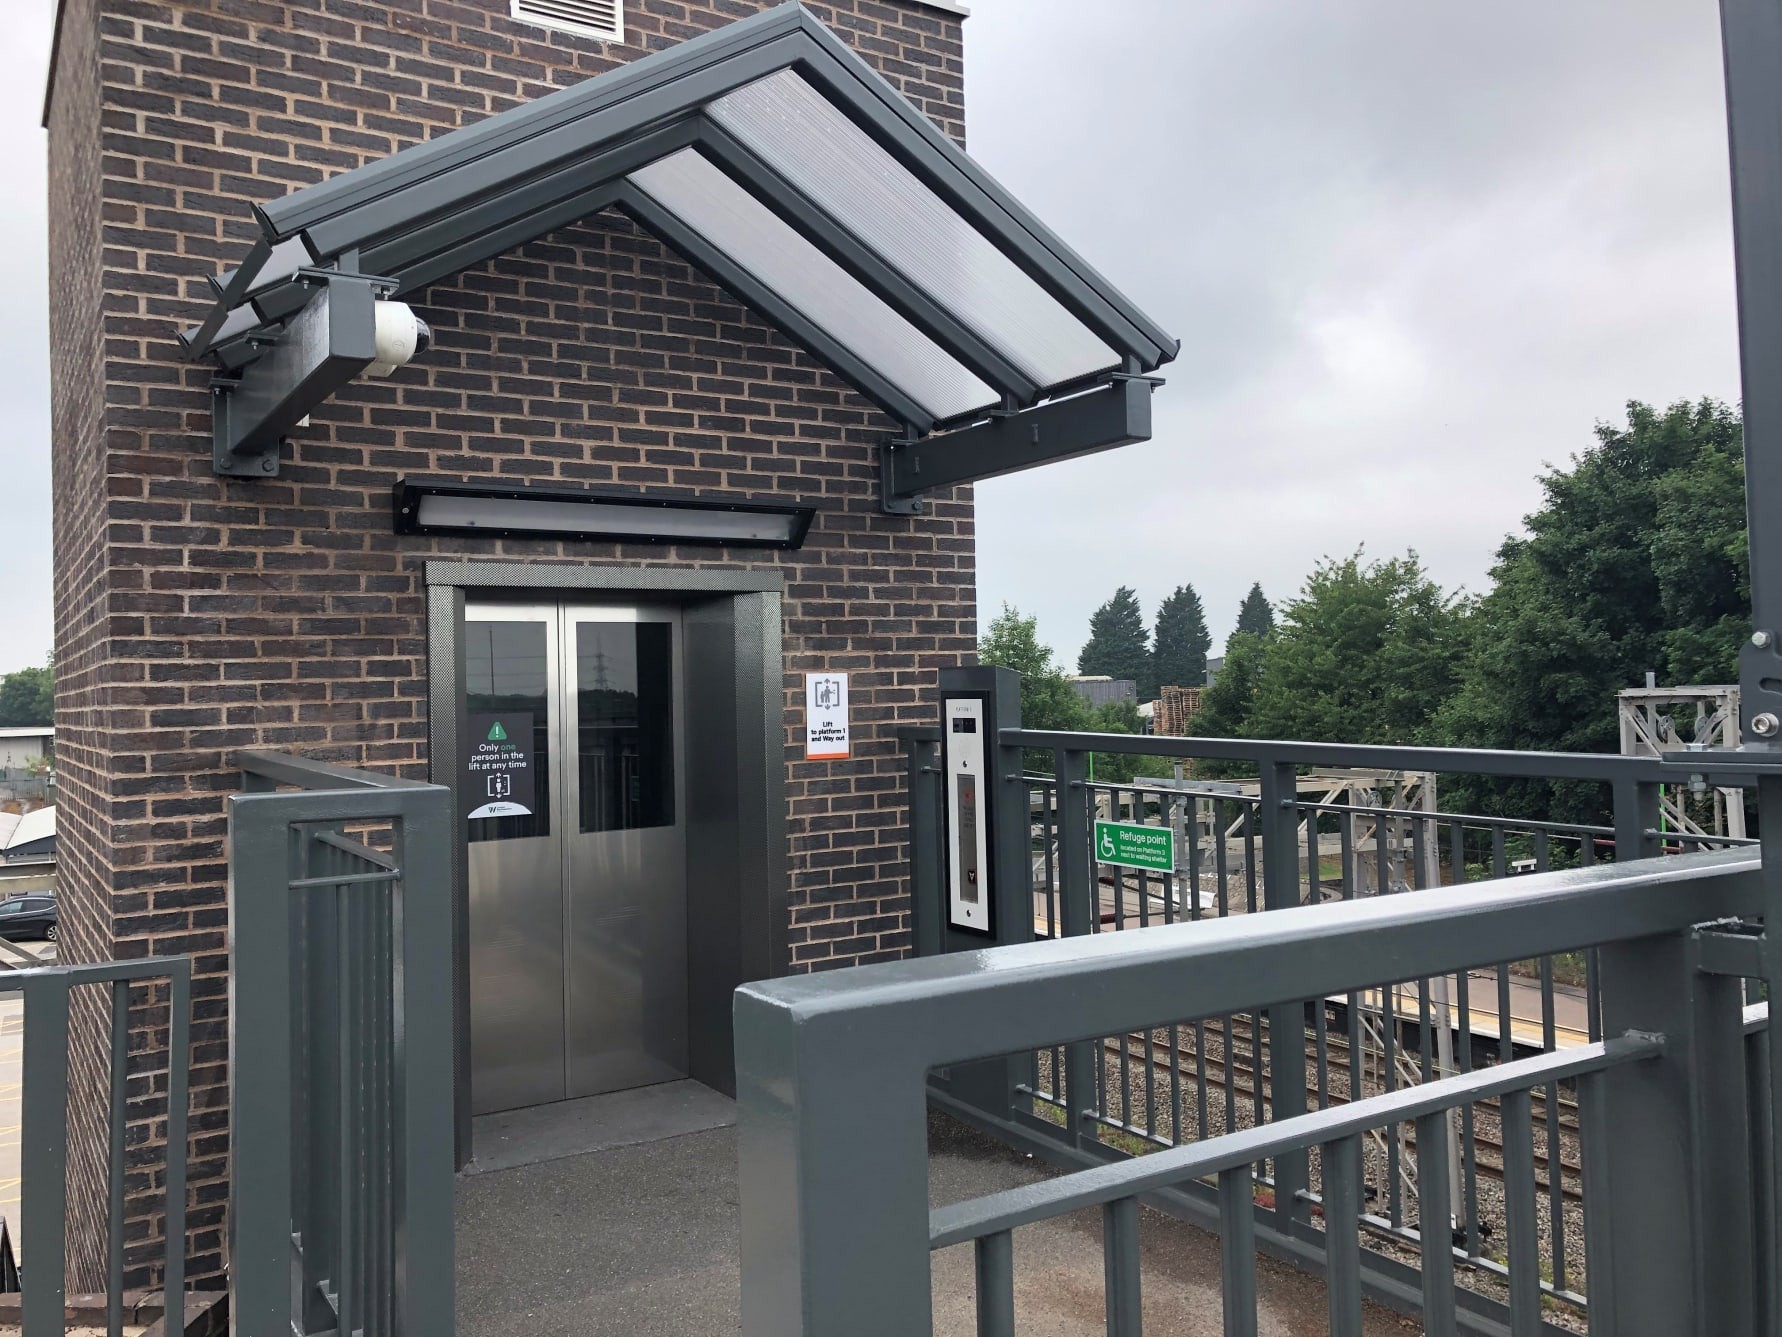 New passenger lifts open at Lichfield Trent Valley station